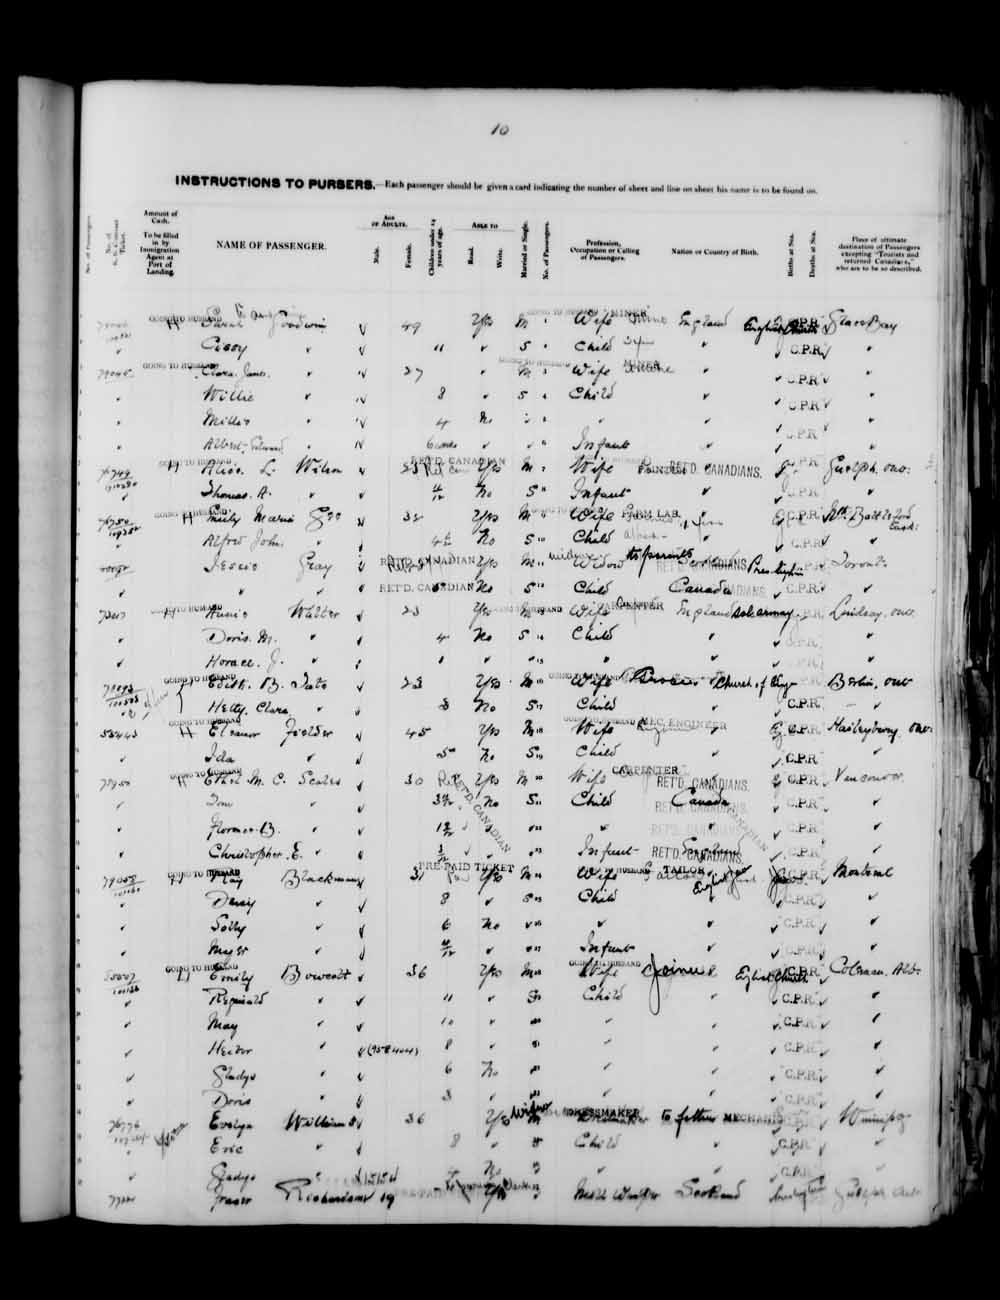 Digitized page of Quebec Passenger Lists for Image No.: e003591581